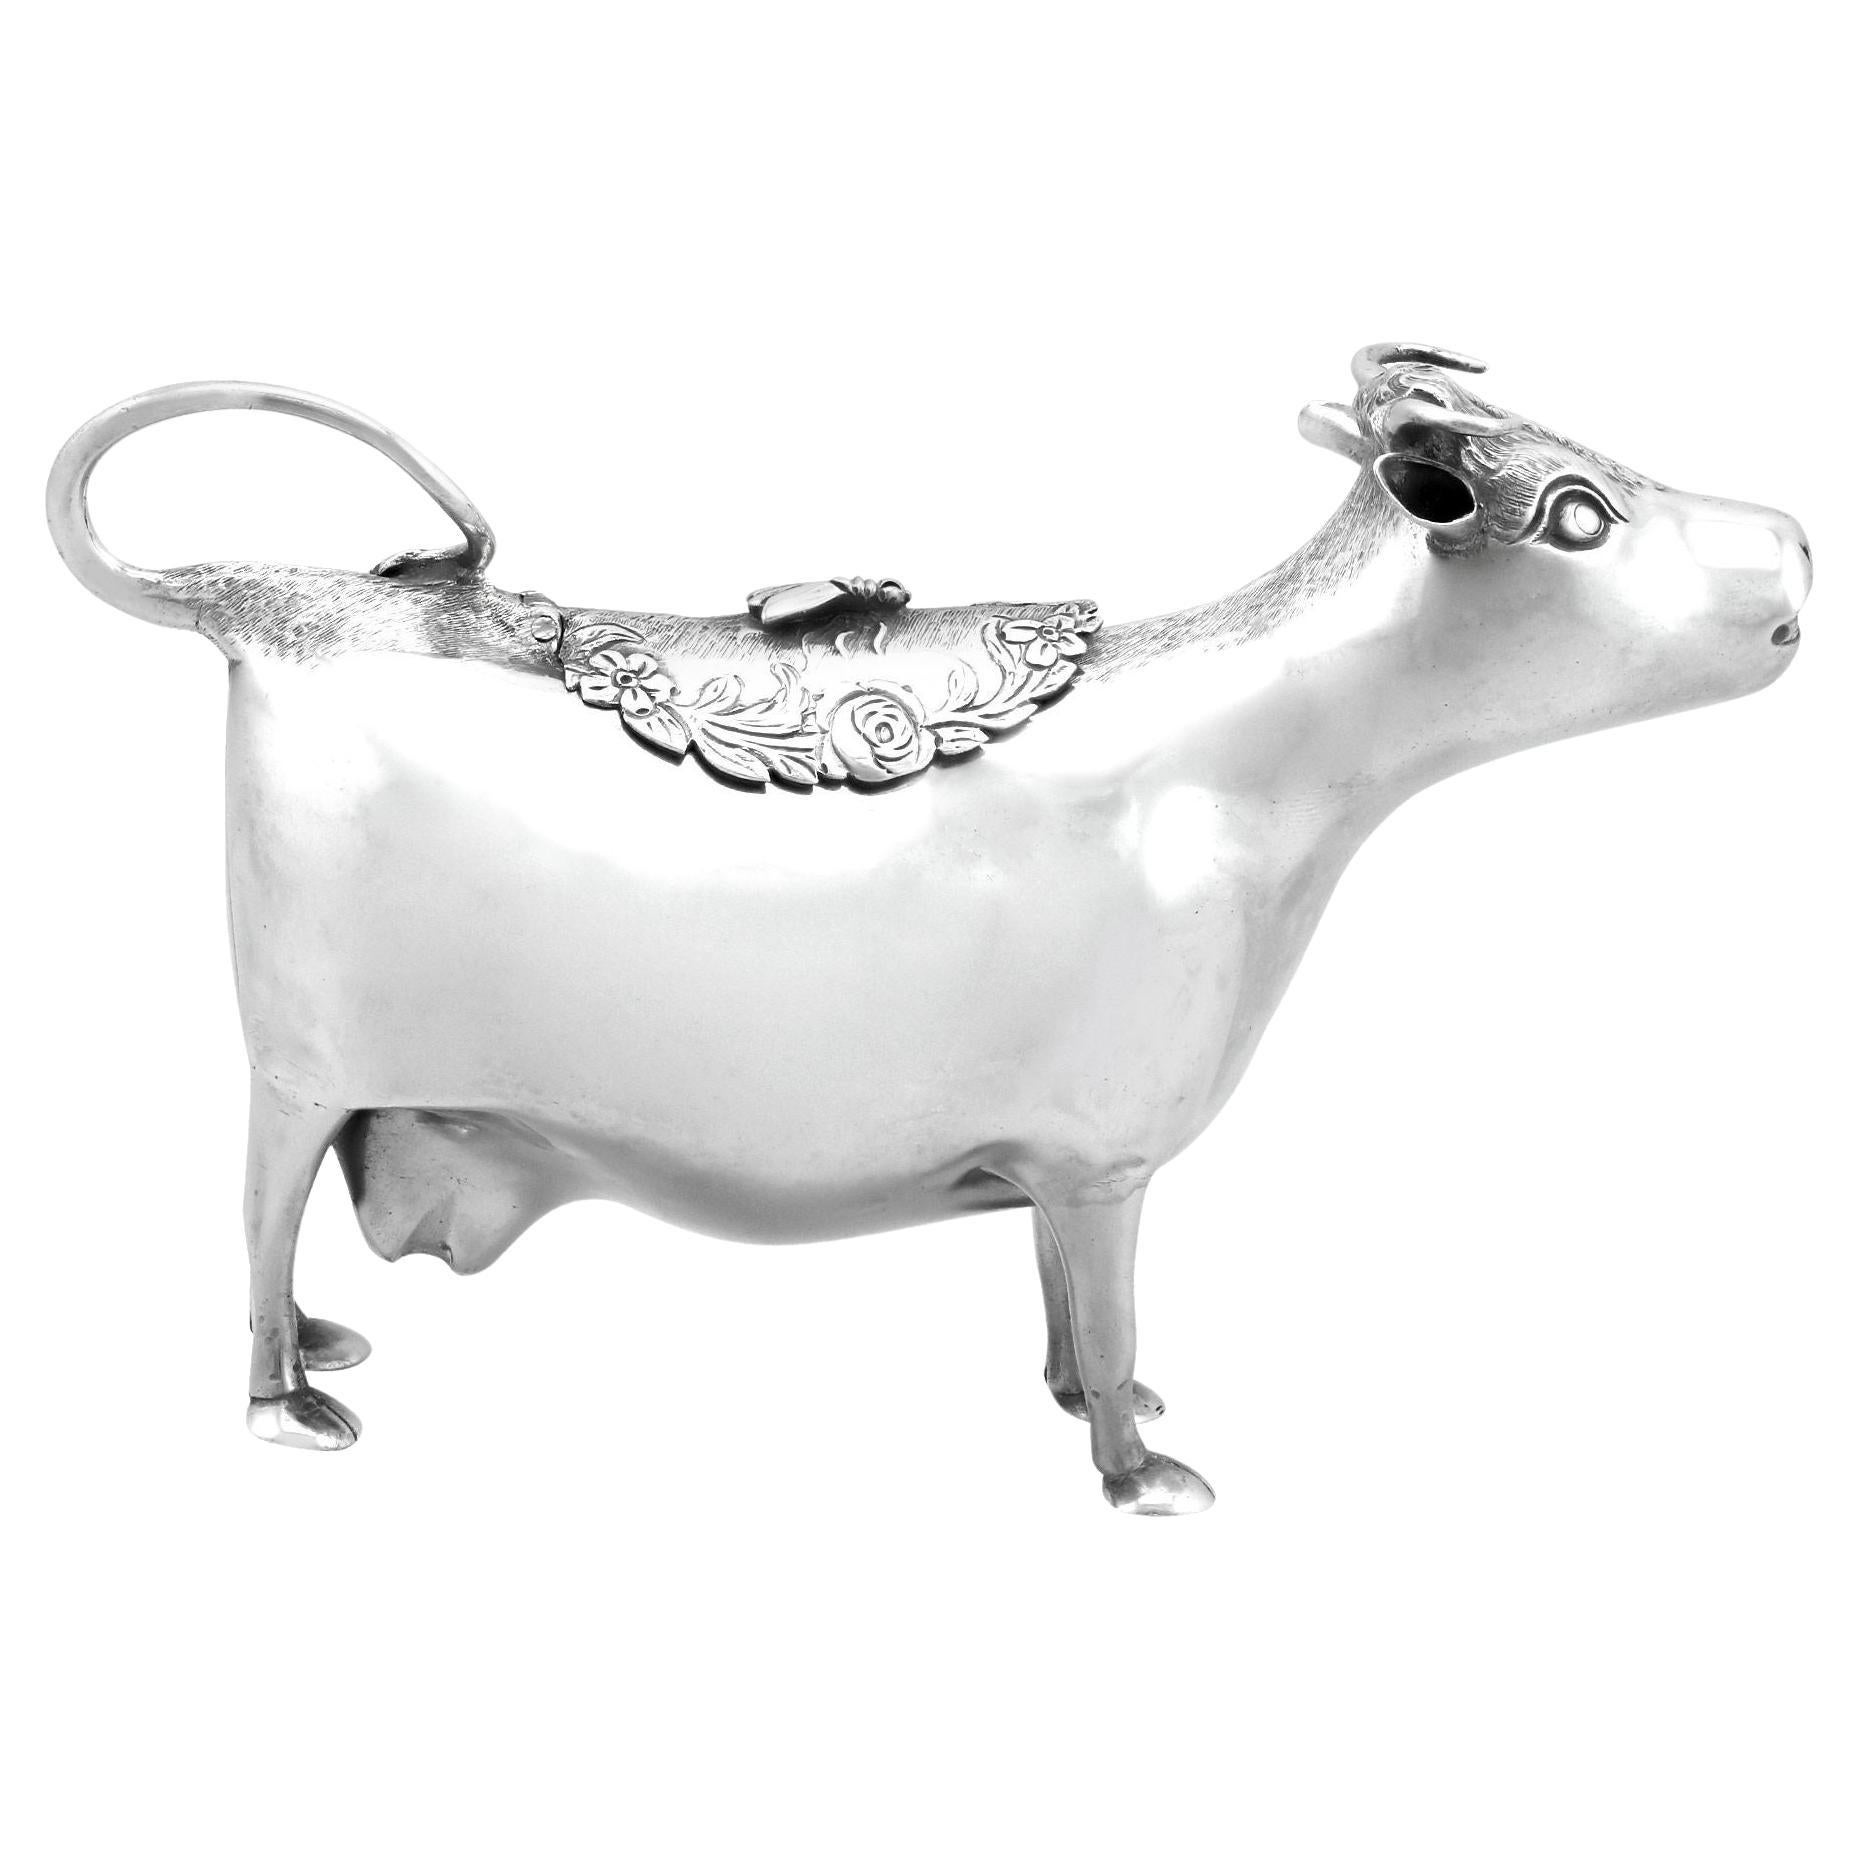 Antique George III Sterling Silver Cow Creamer